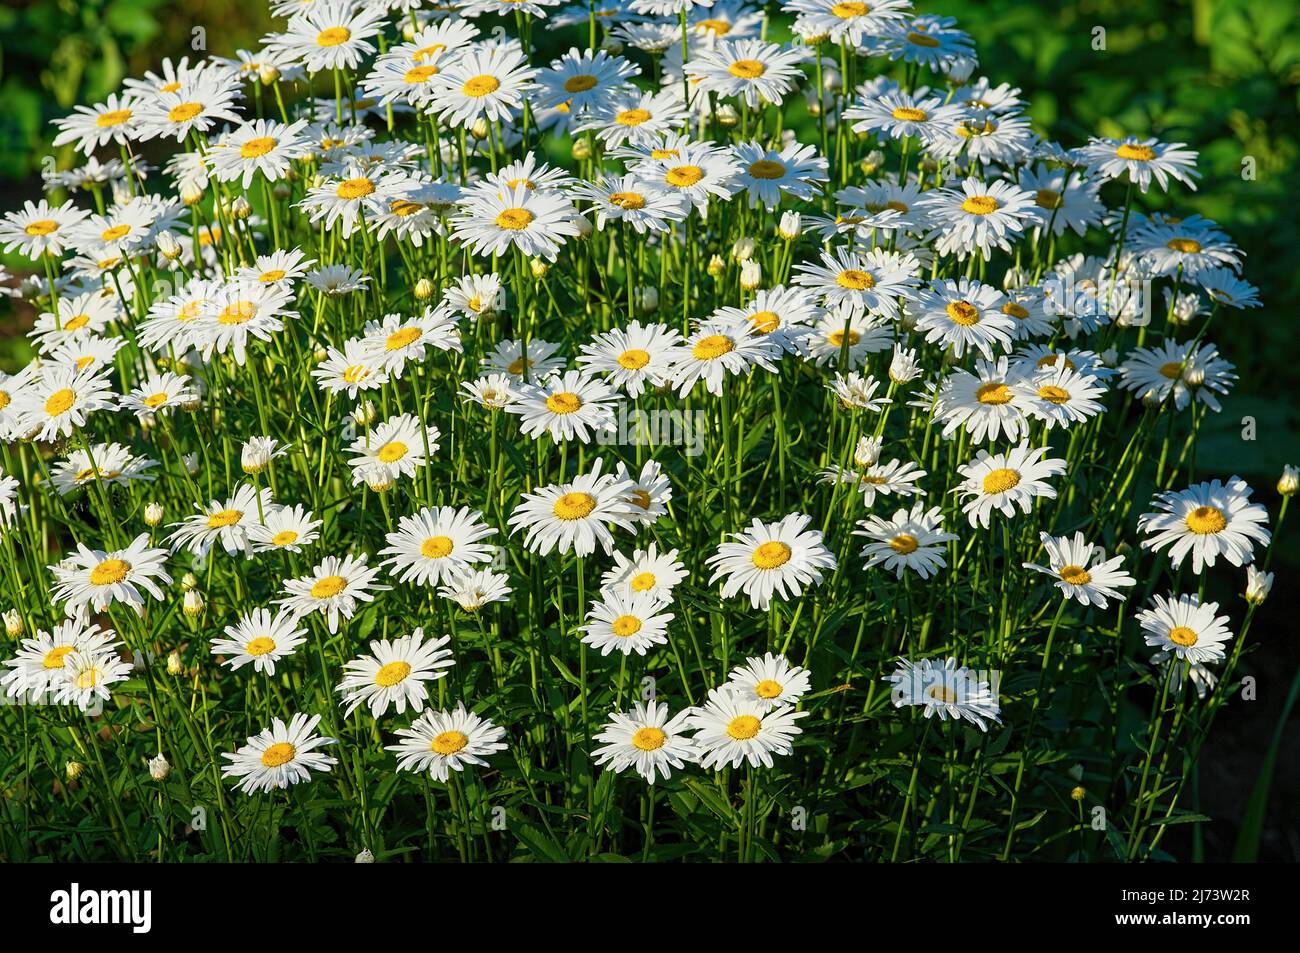 A clump of Shasta Daisies (Leucanthemum x superbum) flowering in the late afternoon sun. Stock Photo